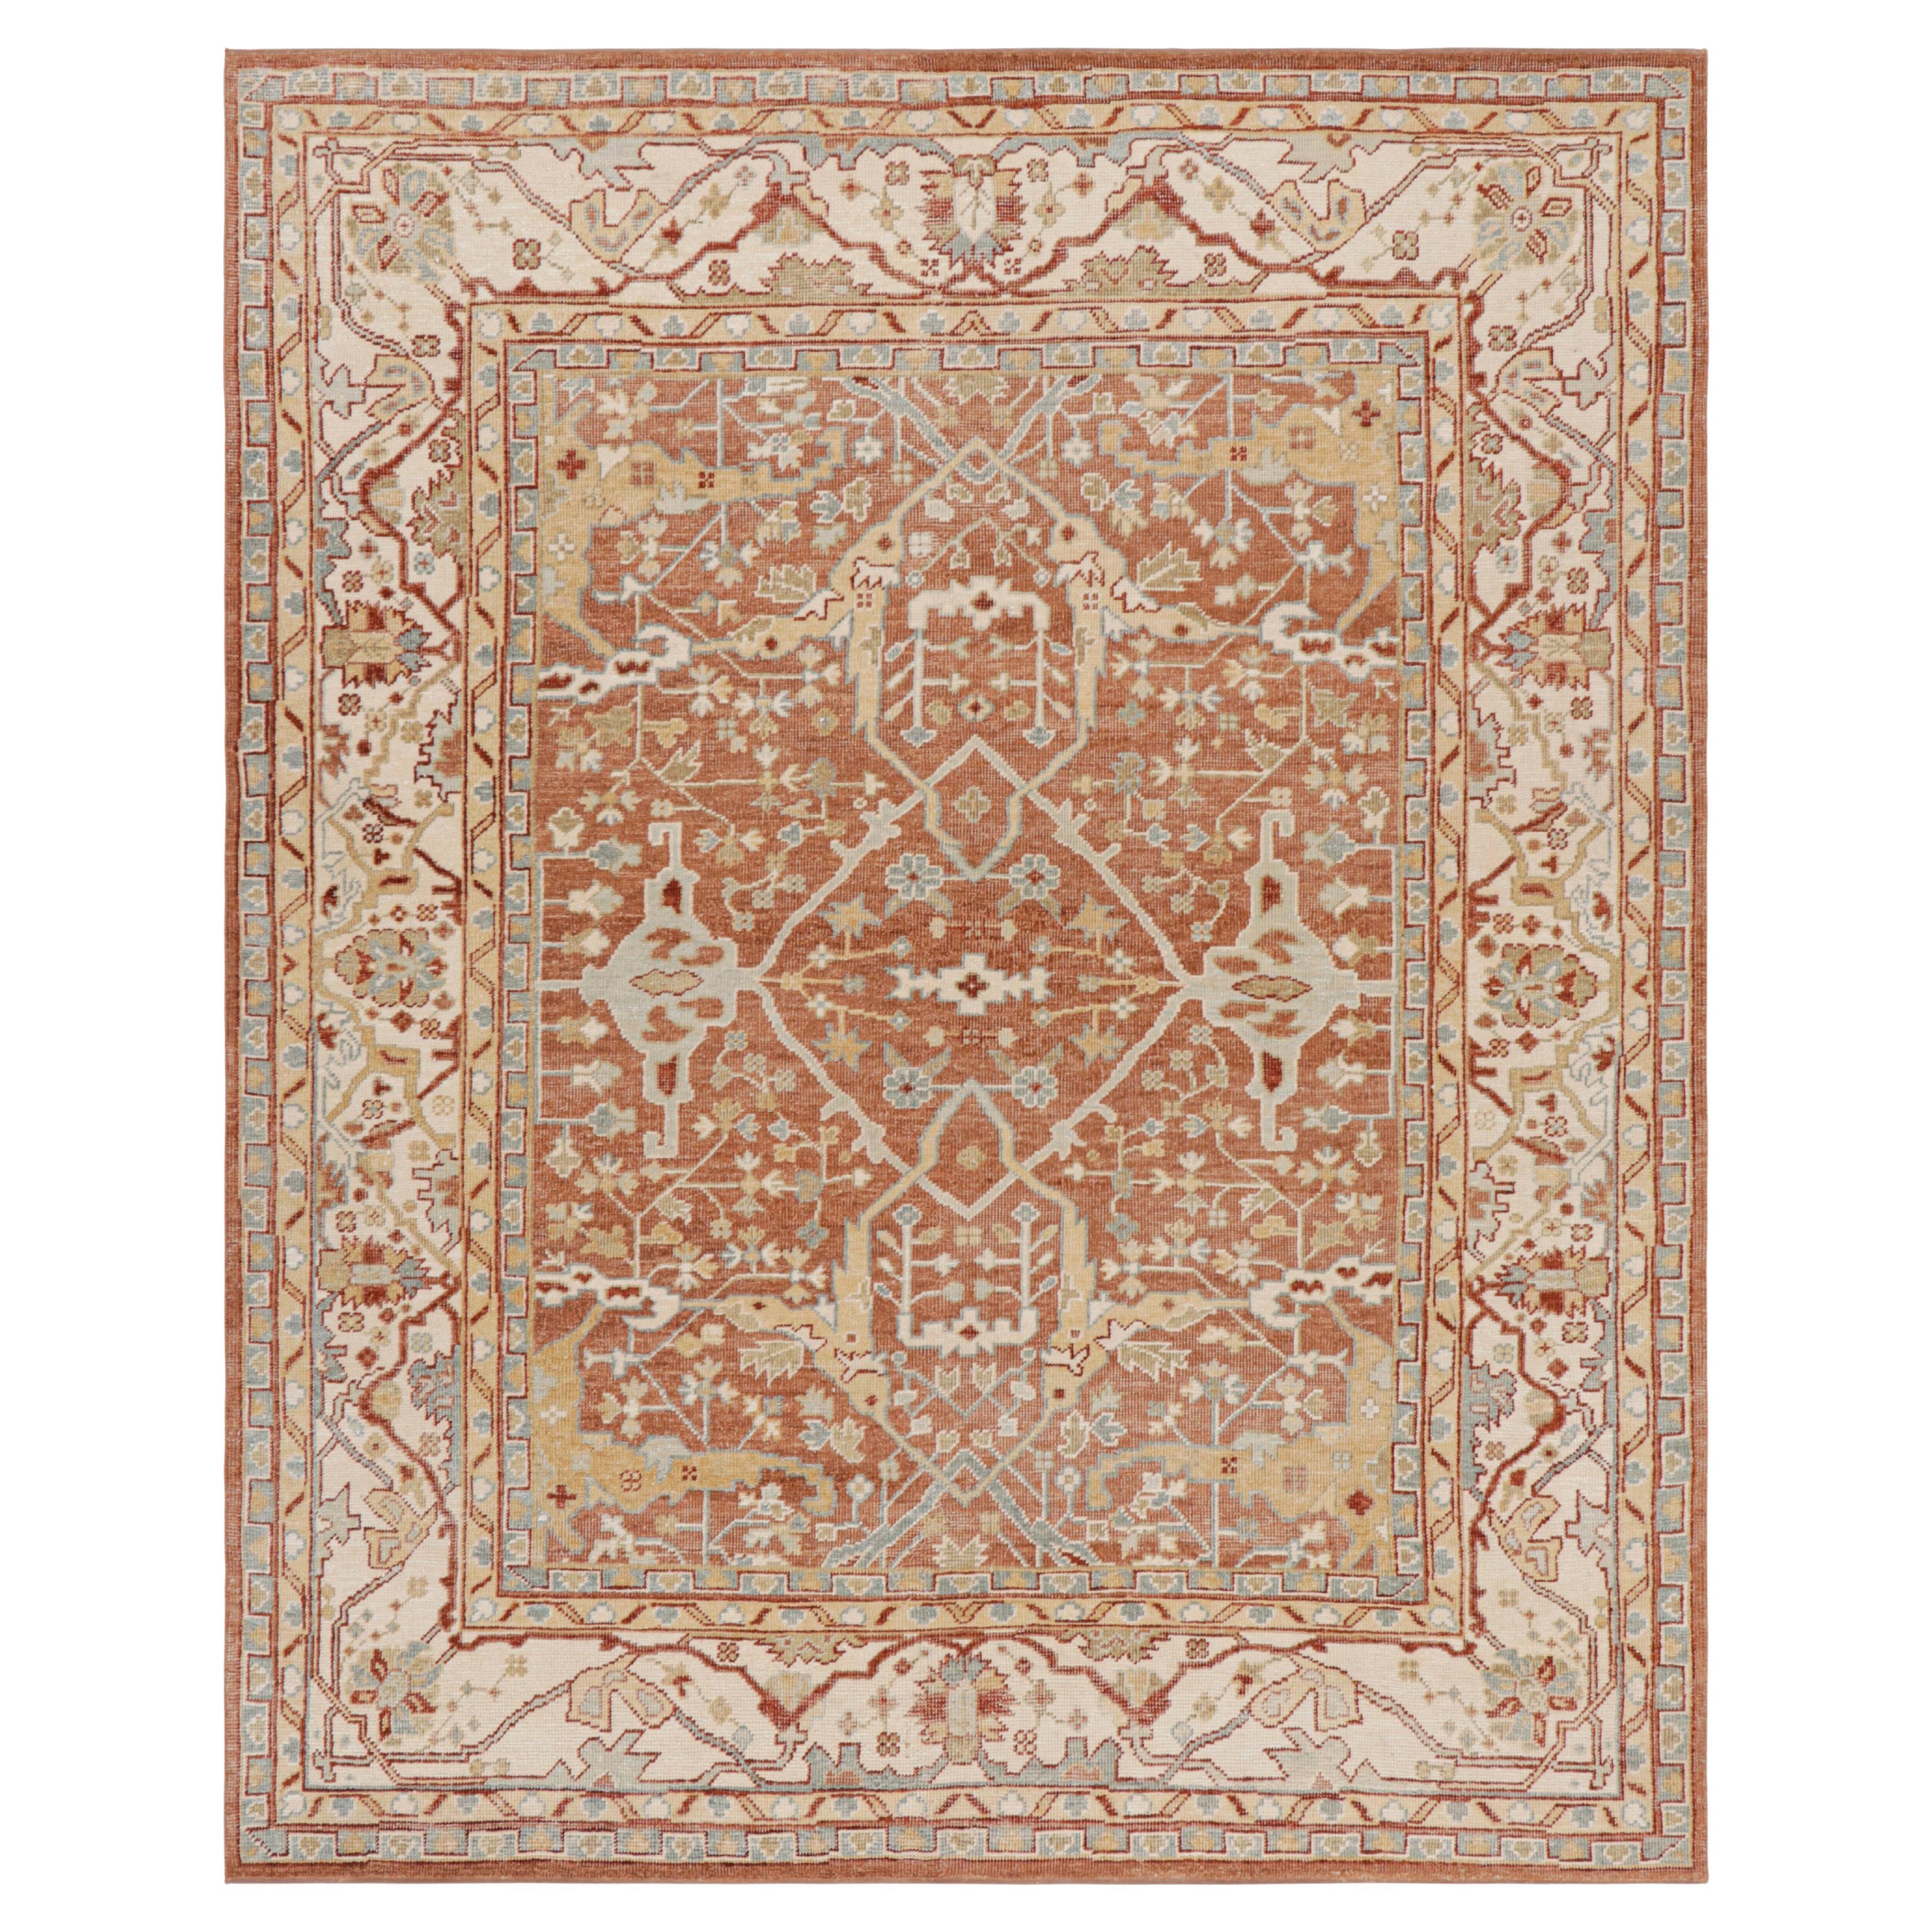 Rug & Kilim’s Oushak Style Rug in Rust Tones with Floral Patterns